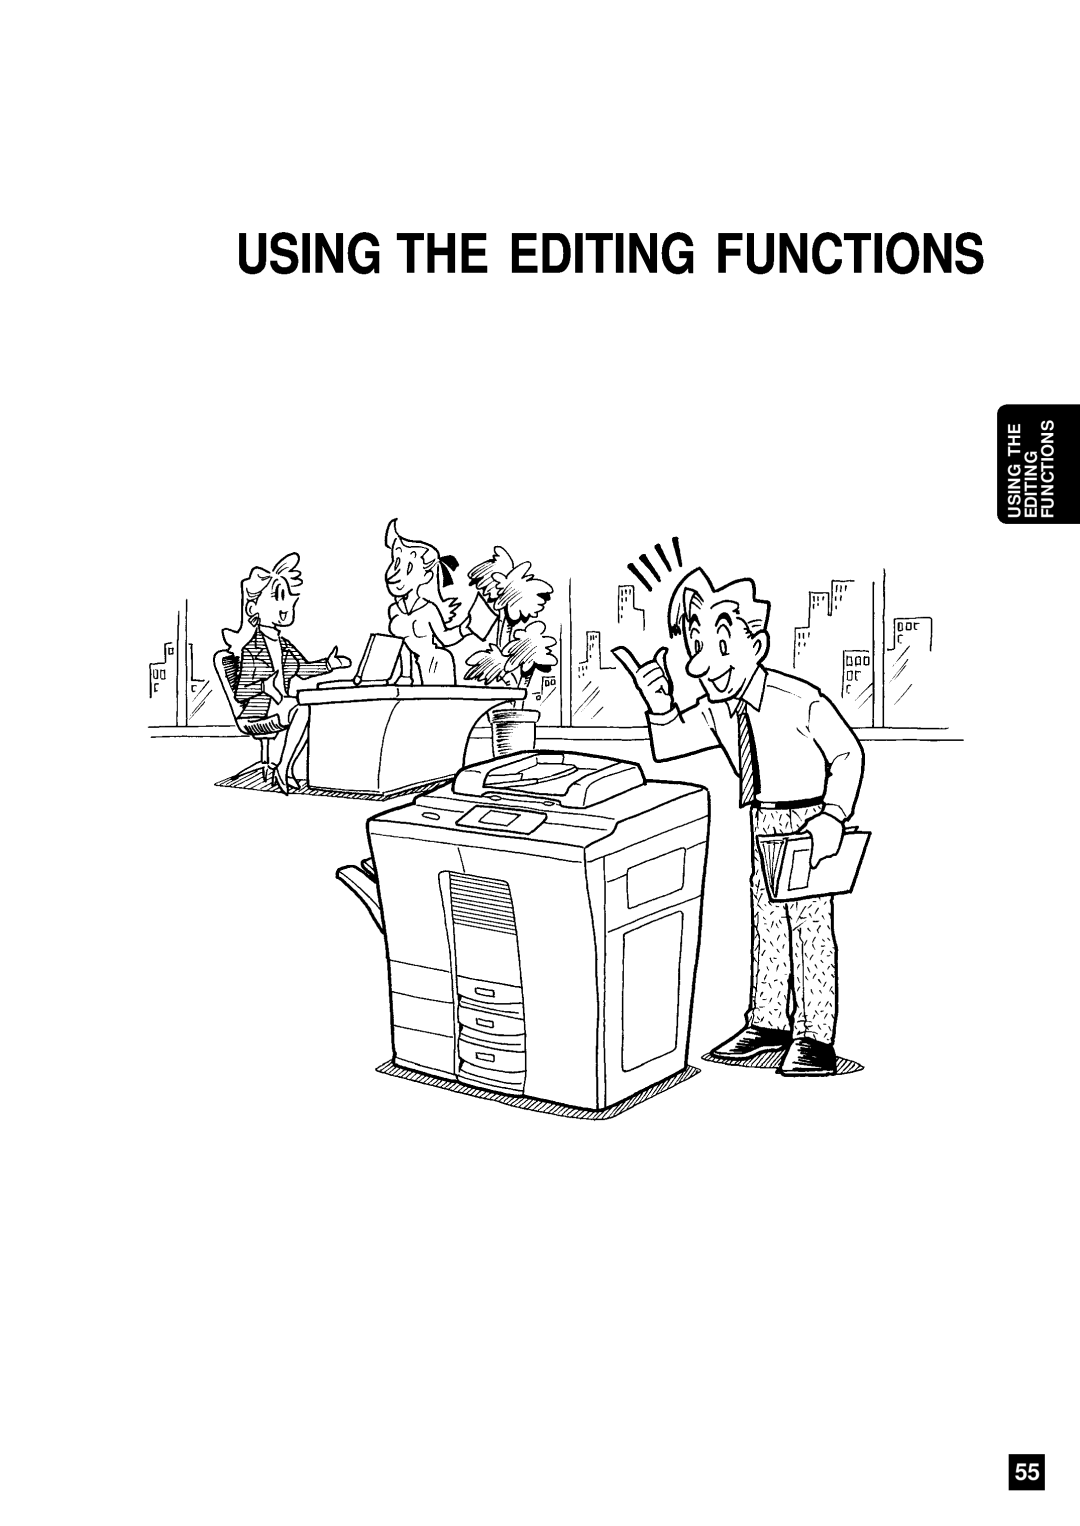 Sharp AR-650 operation manual Using The Editing Functions, Functions Editing 